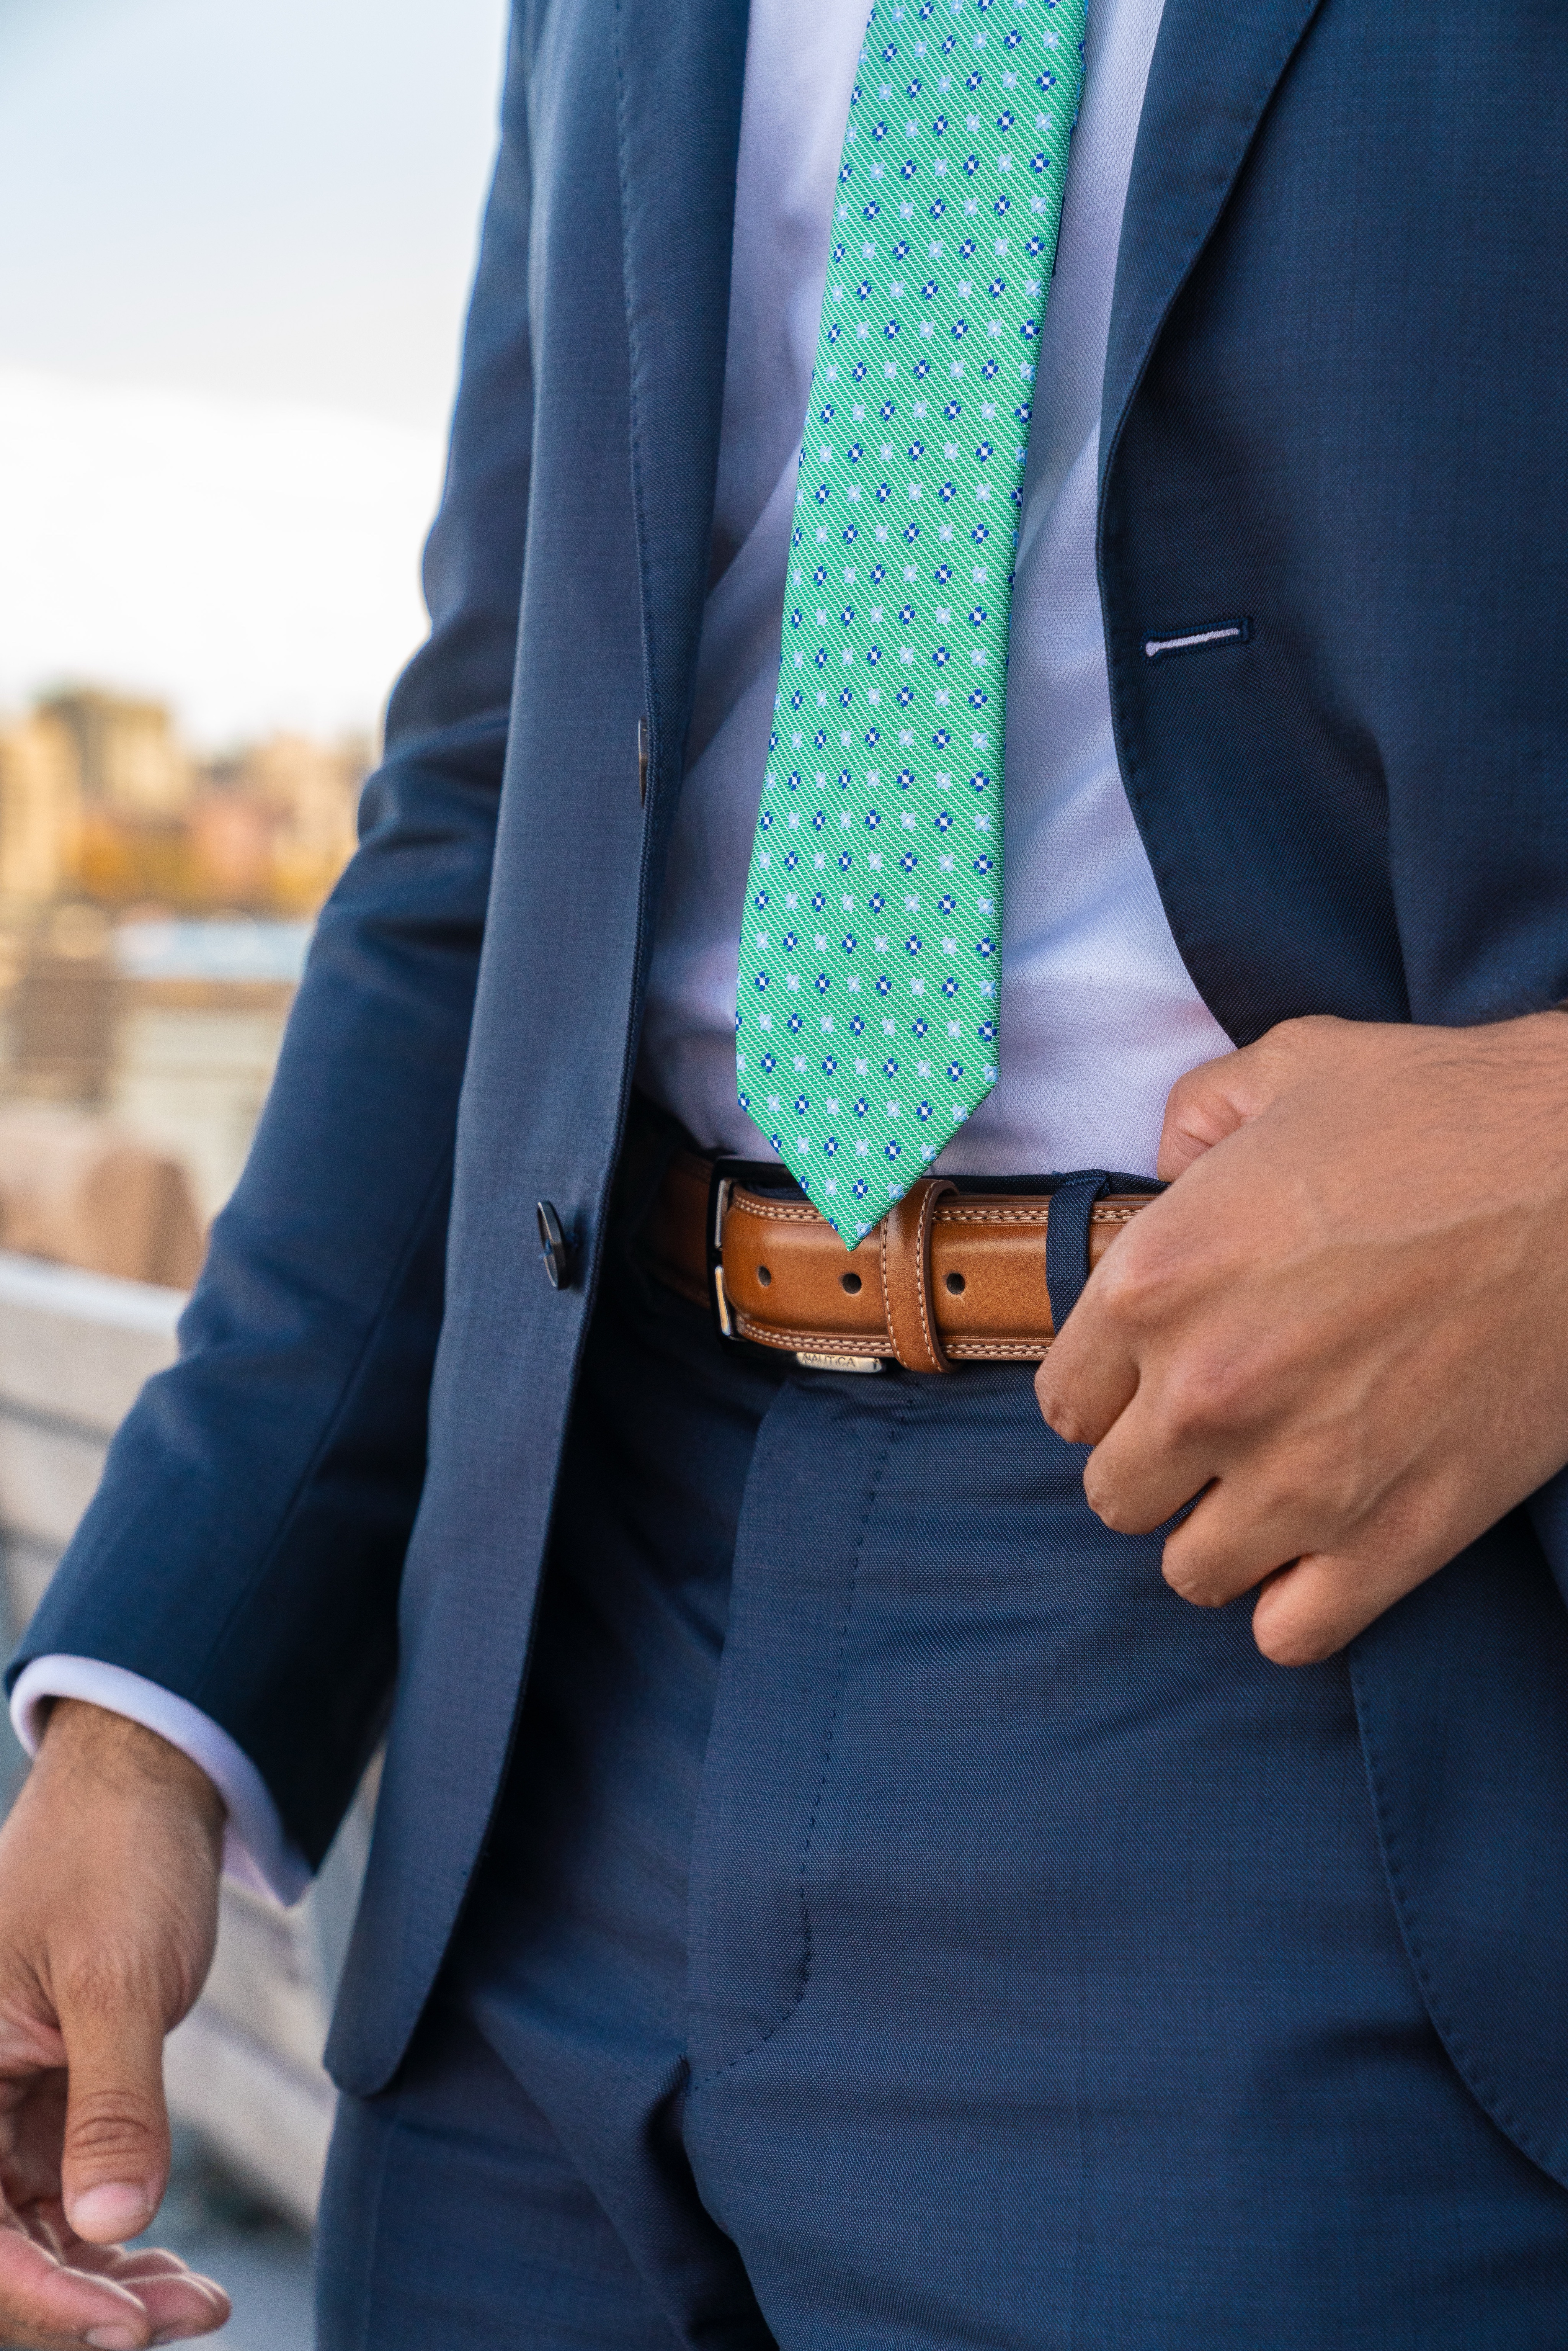 BASIC RULES WHEN WEARING A BELT  - wearing a brown belt with a blue navy suit for men - dandy in the bronx     Fashionable yet Functional. Belts can help keep your pants up while also adding a touch of contrast to your outfit. Here are some basic rules when wearing a belt. wearing a brown belt with a blue navy suit for men - dandy in the bronx